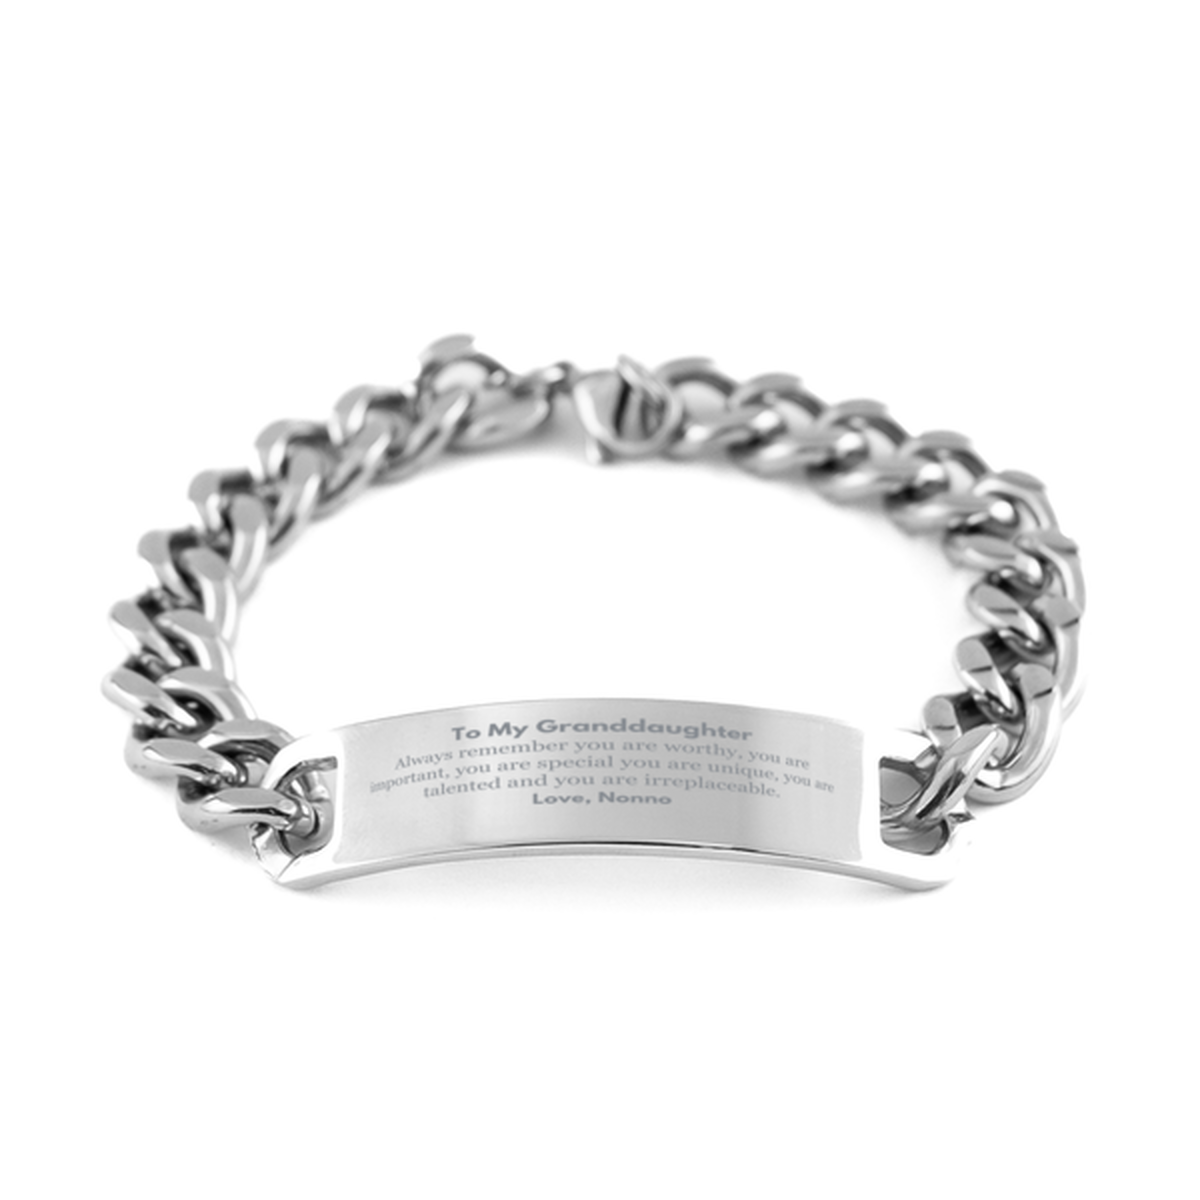 Granddaughter Birthday Gifts from Nonno, Inspirational Cuban Chain Stainless Steel Bracelet for Granddaughter Christmas Graduation Gifts for Granddaughter Always remember you are worthy, you are important. Love, Nonno